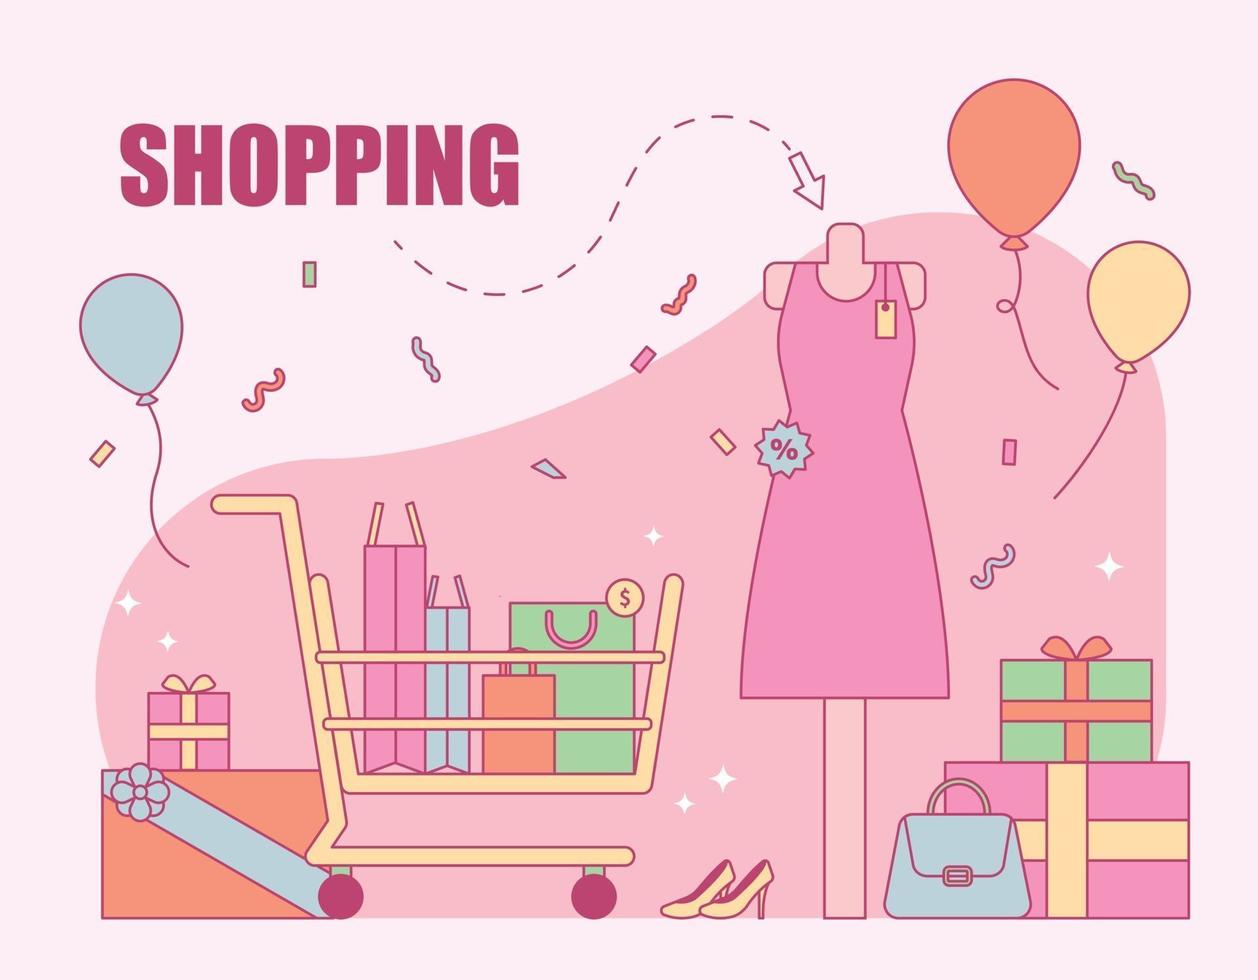 Shopping sale event banner poster. vector